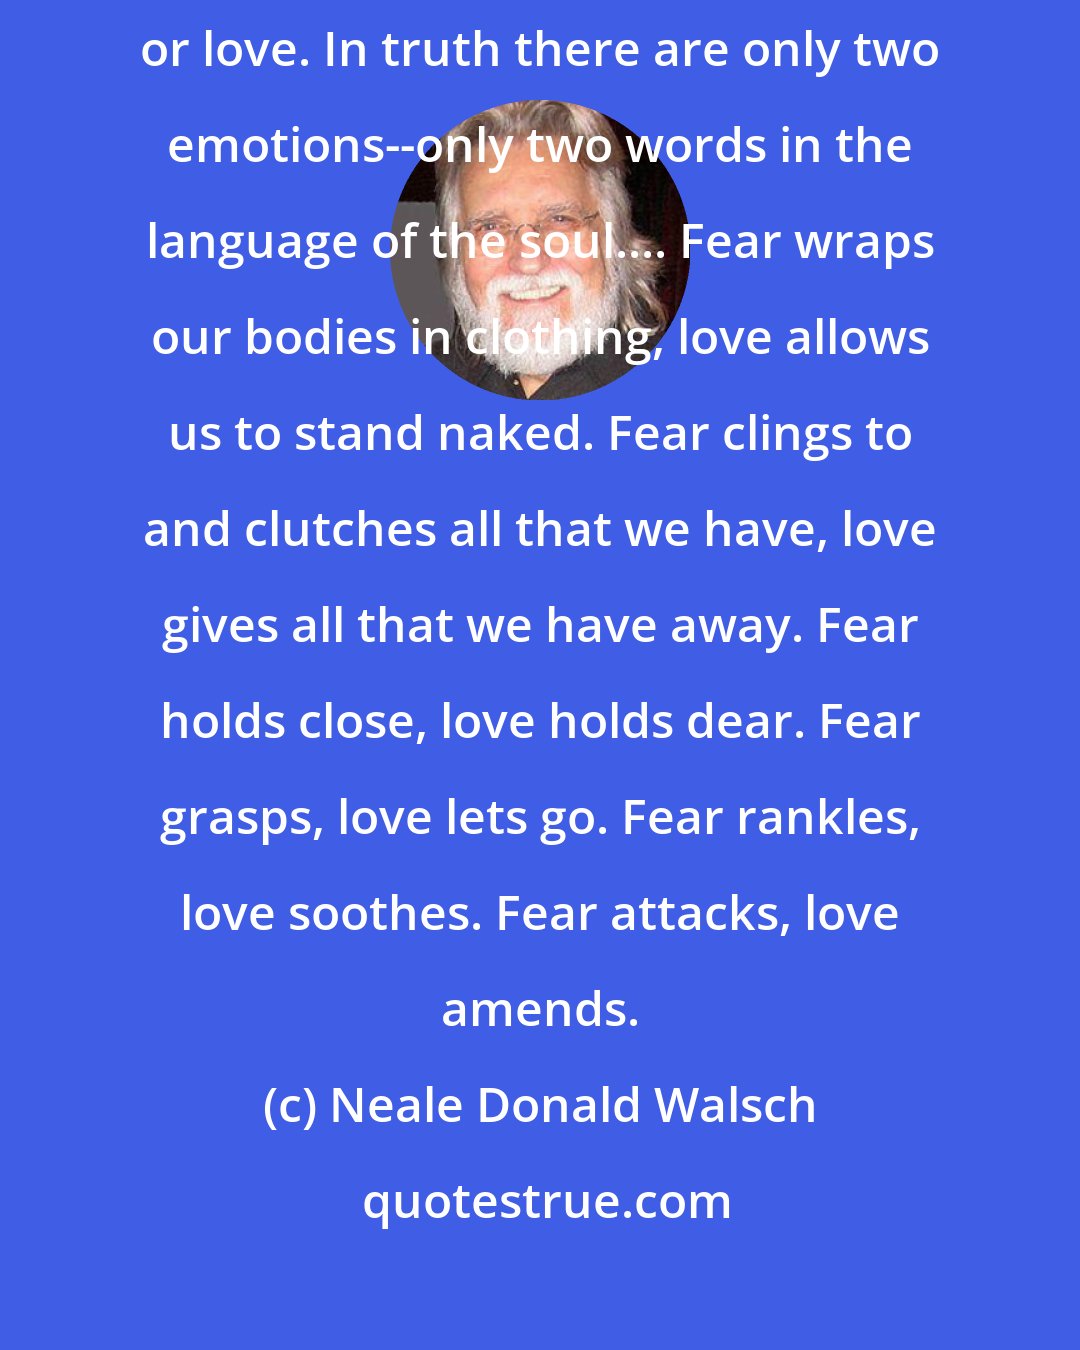 Neale Donald Walsch: All human actions are motivated at their deepest level by two emotions--fear or love. In truth there are only two emotions--only two words in the language of the soul.... Fear wraps our bodies in clothing, love allows us to stand naked. Fear clings to and clutches all that we have, love gives all that we have away. Fear holds close, love holds dear. Fear grasps, love lets go. Fear rankles, love soothes. Fear attacks, love amends.